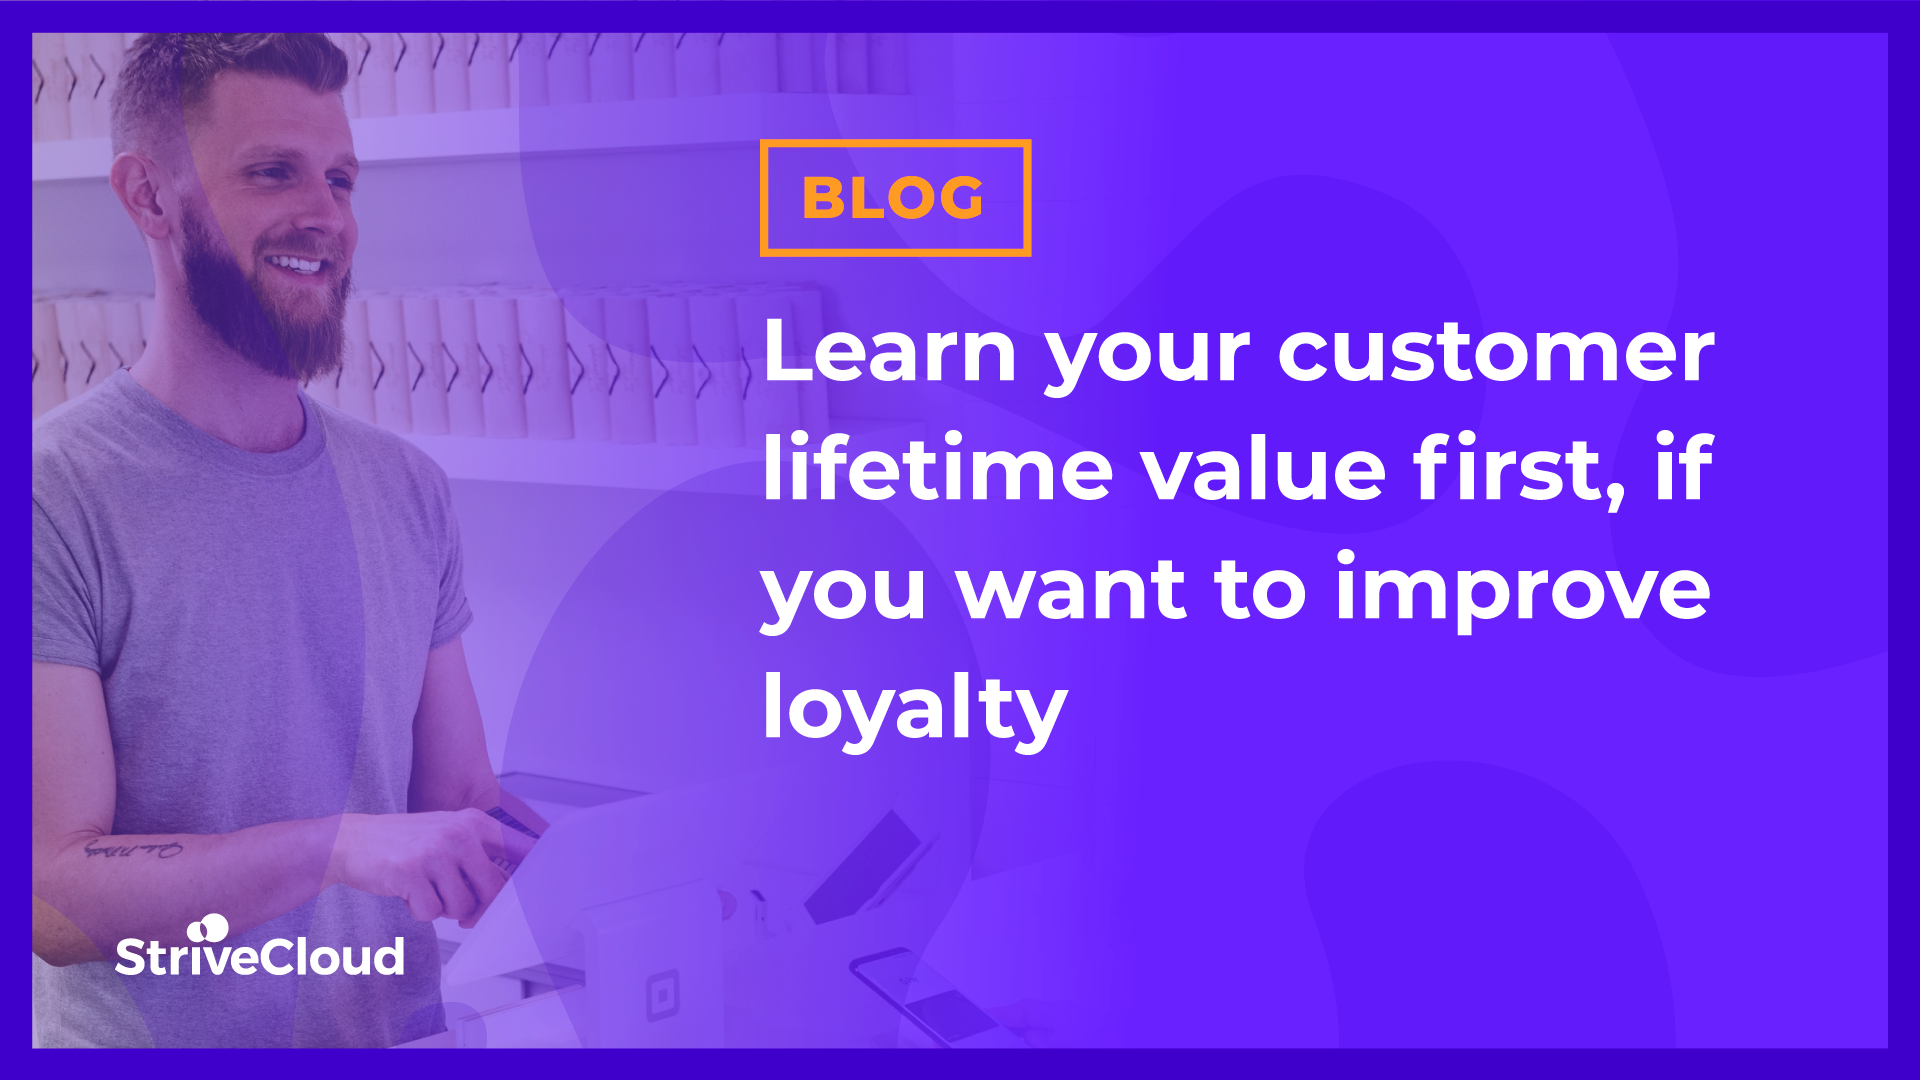 Learn your customer lifetime value first, if you want to improve loyalty